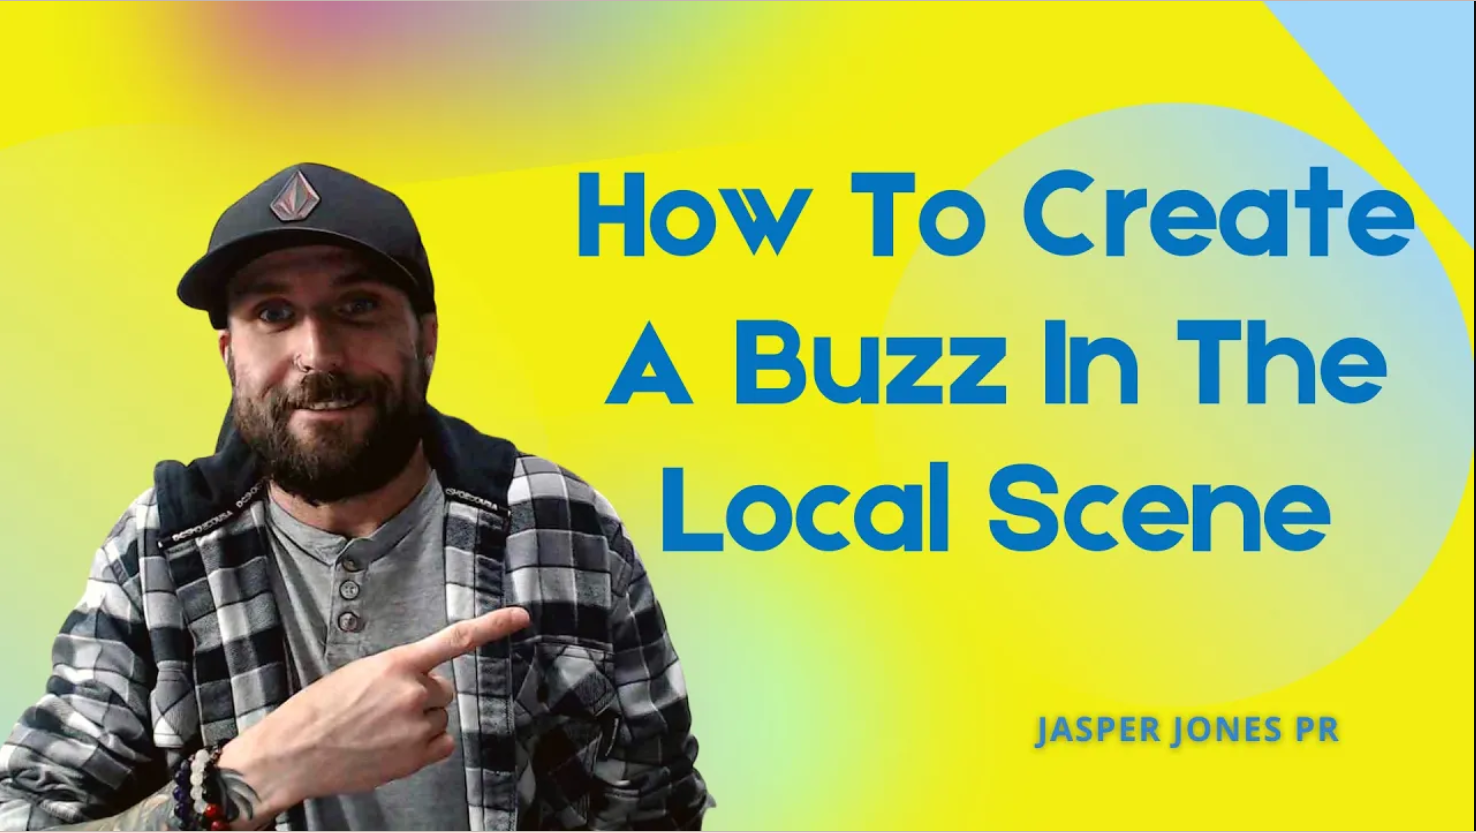 How To Create A Buzz In The Local Scene